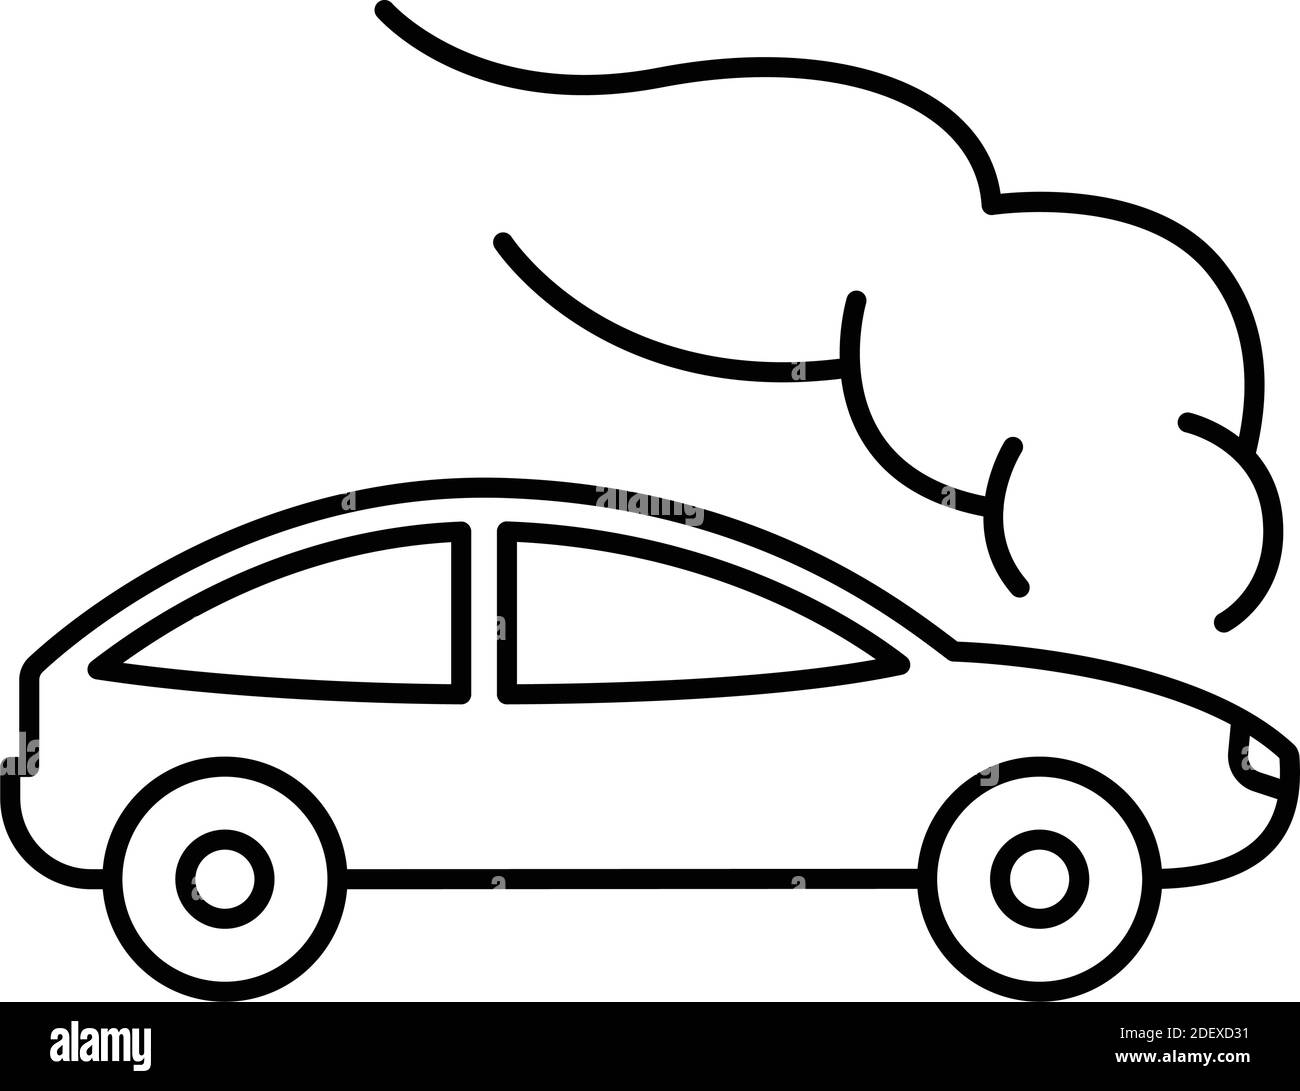 Car smoke Isolated Vector icon that can be easily modified or edited ...